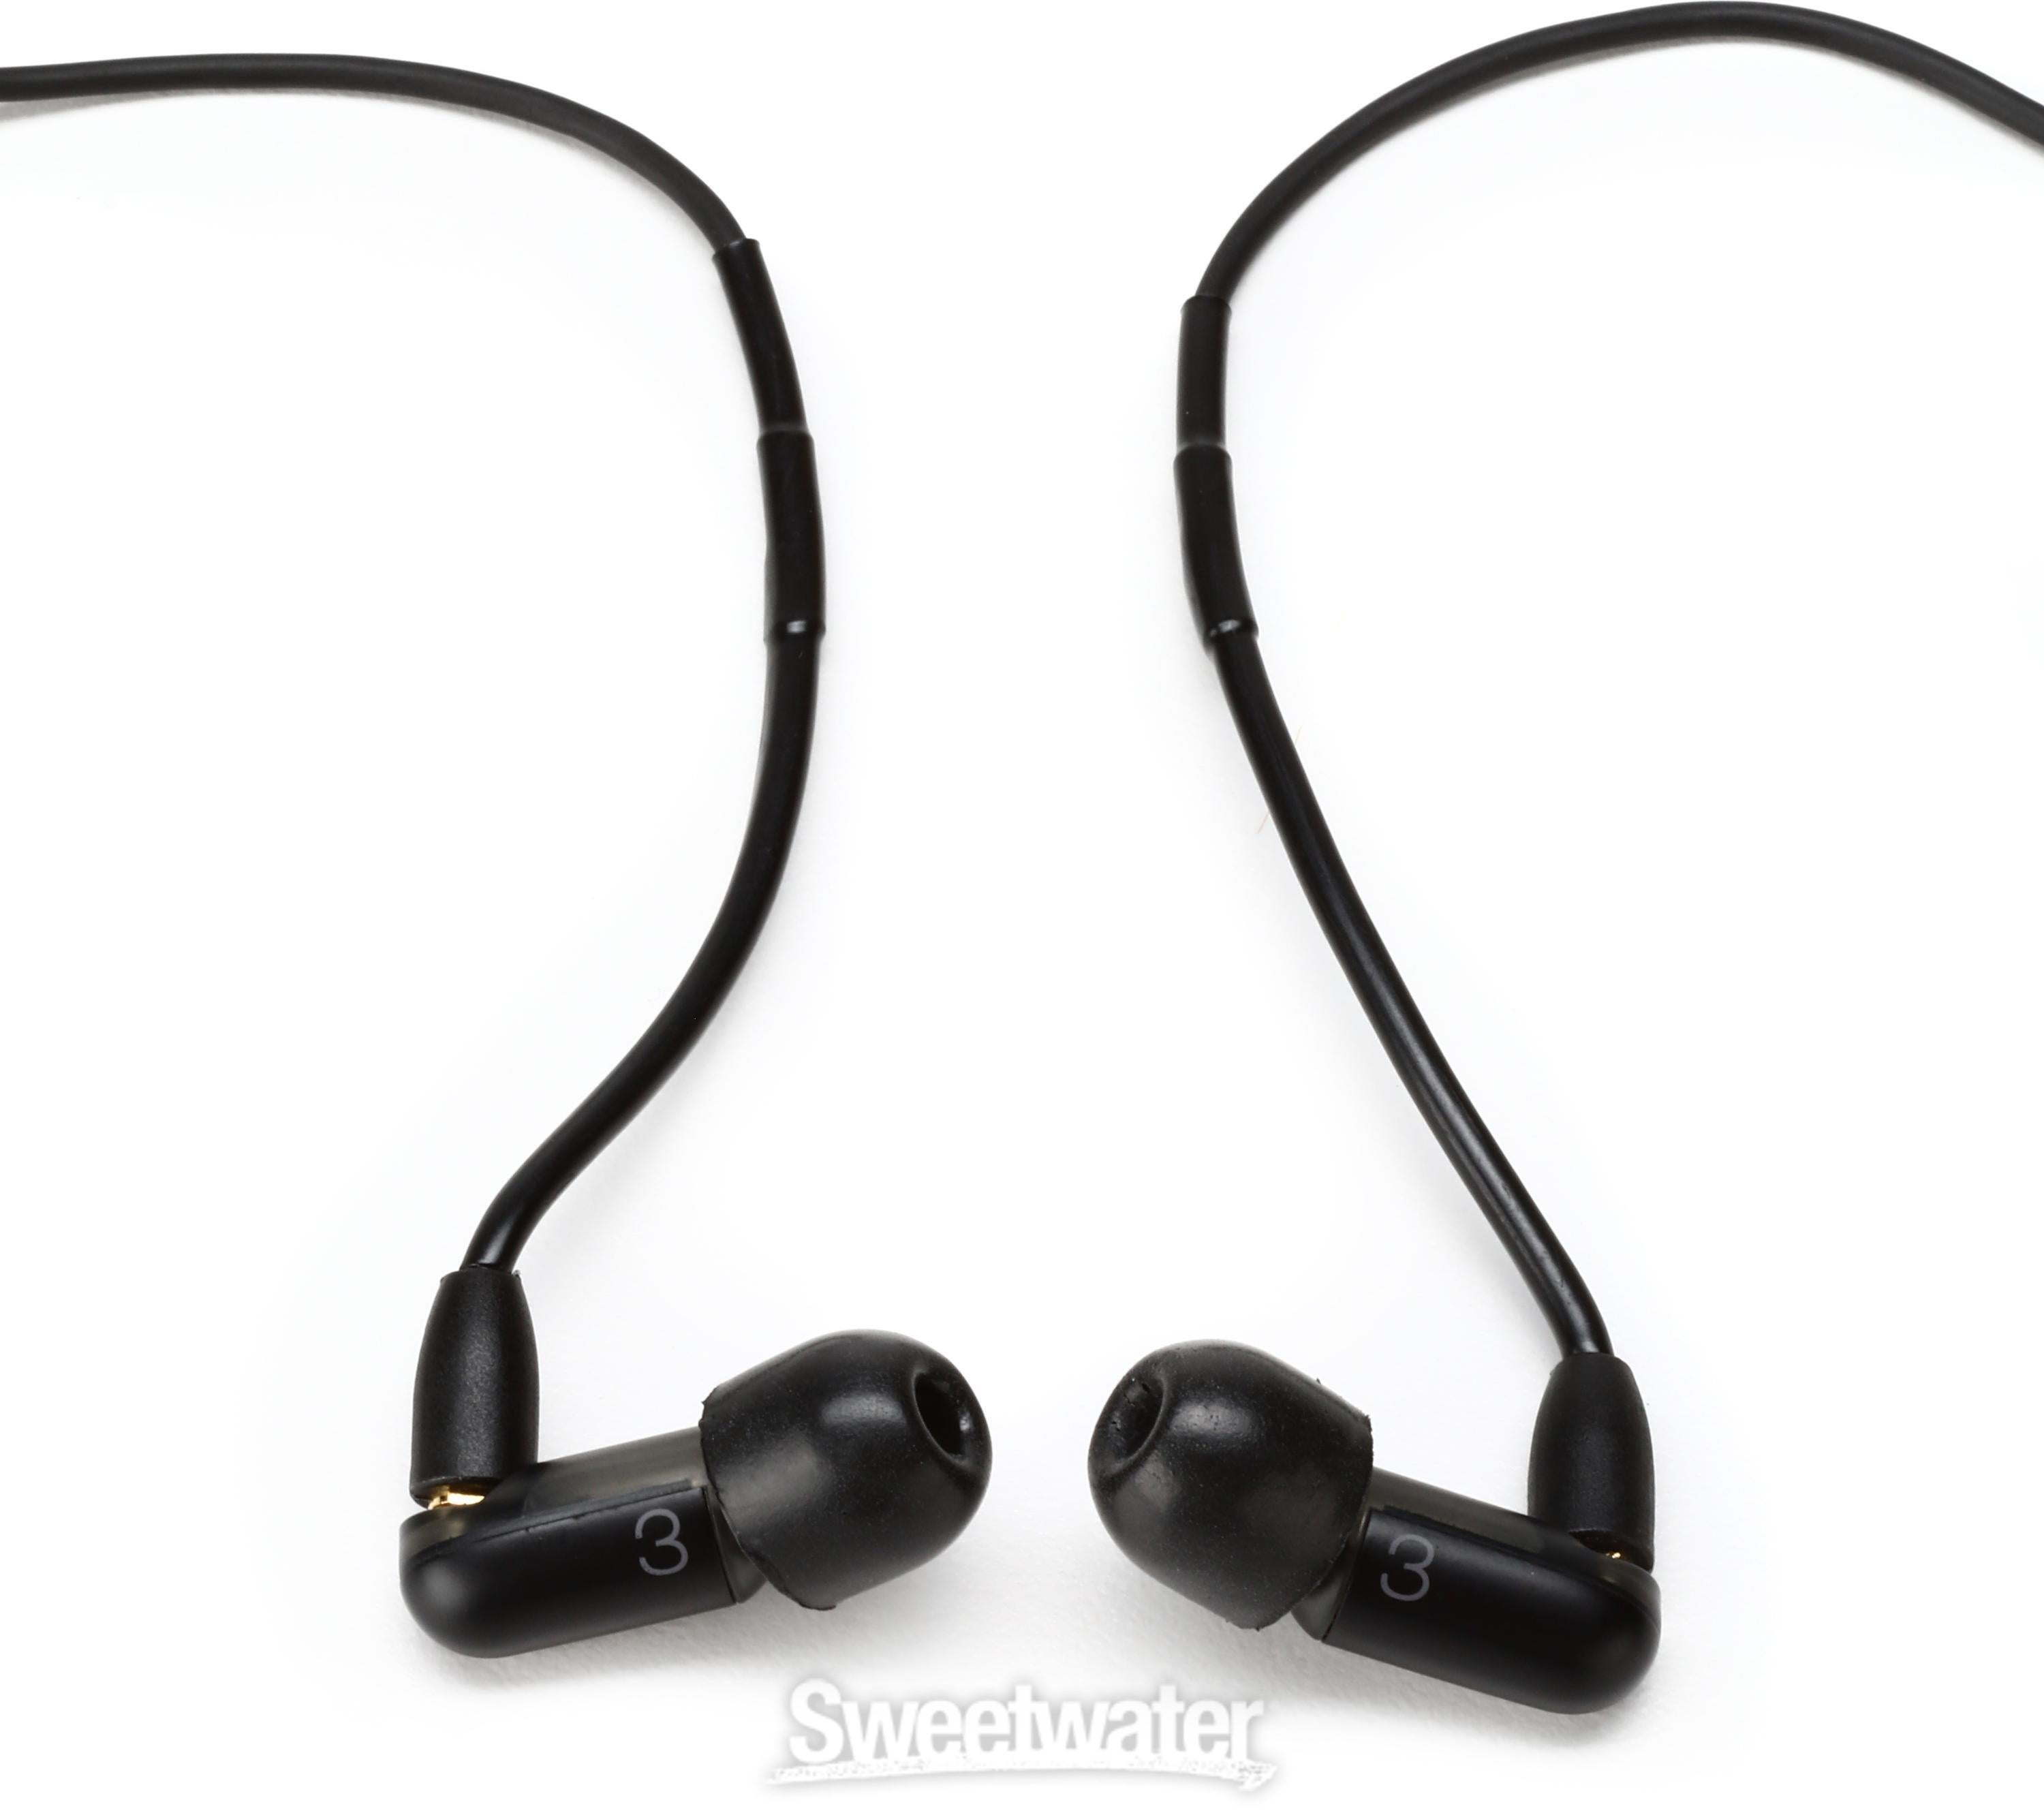 Shure AONIC 3 Sound Isolating Earphones   Black   Sweetwater